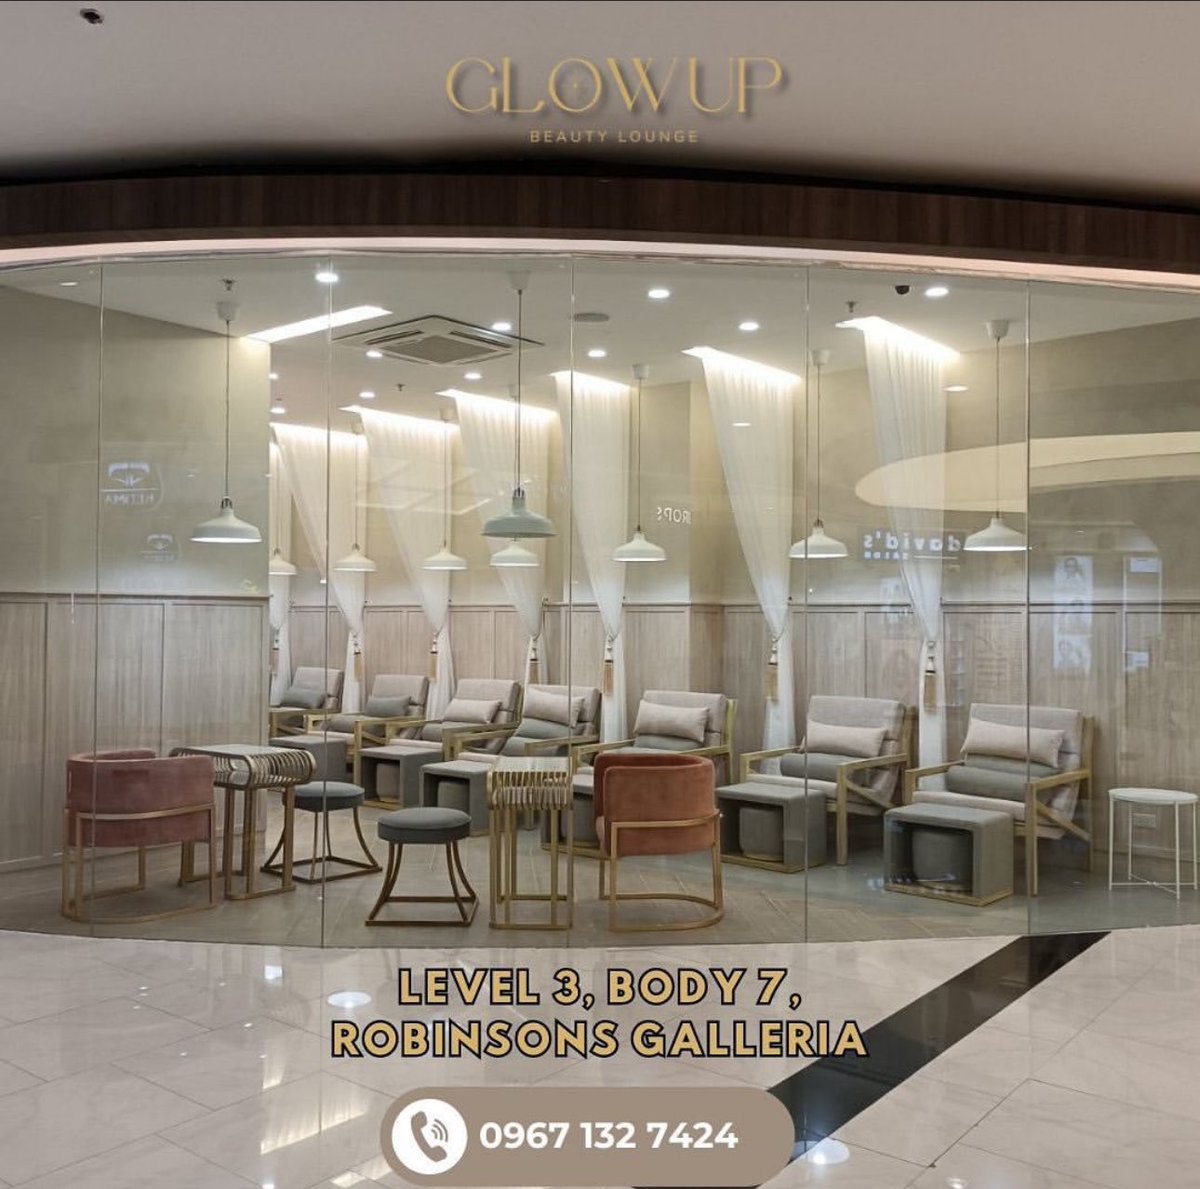 ✨ NEW BRANCH ALERT Glow Up Beauty Lounge opens in Robinsons Galleria starting TODAY, January 24! 💅🏻 Book your pamper day and see you there! Level 3, Body 7, Rob Galleria 0967 132 7424